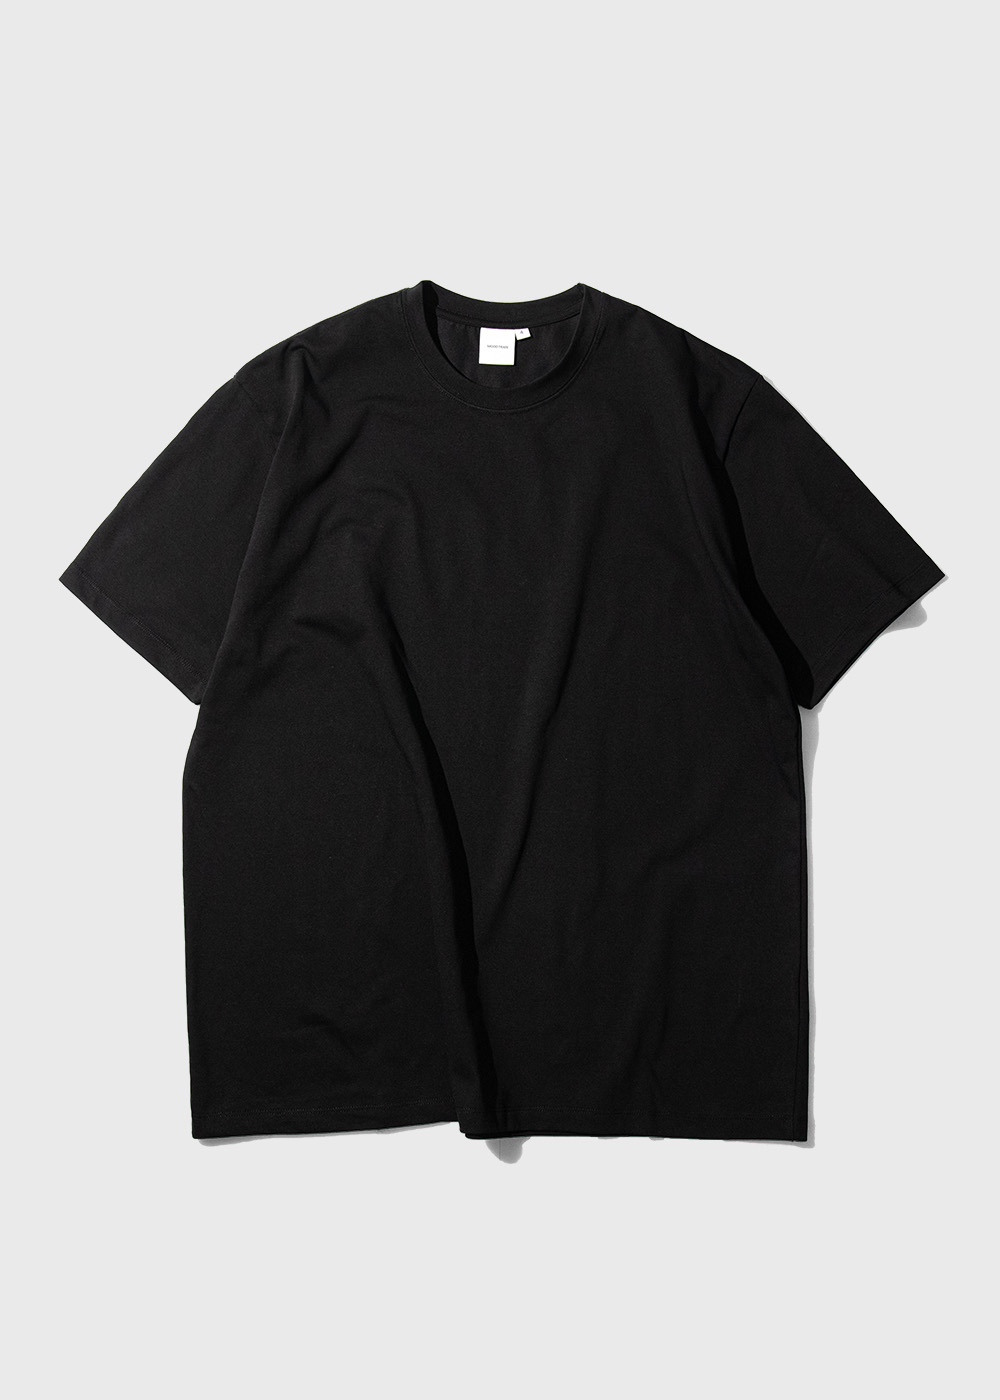 G. Heavy Enzymed Combed Cotton-Polyester Blended 12/1 Single T-shirt _ black